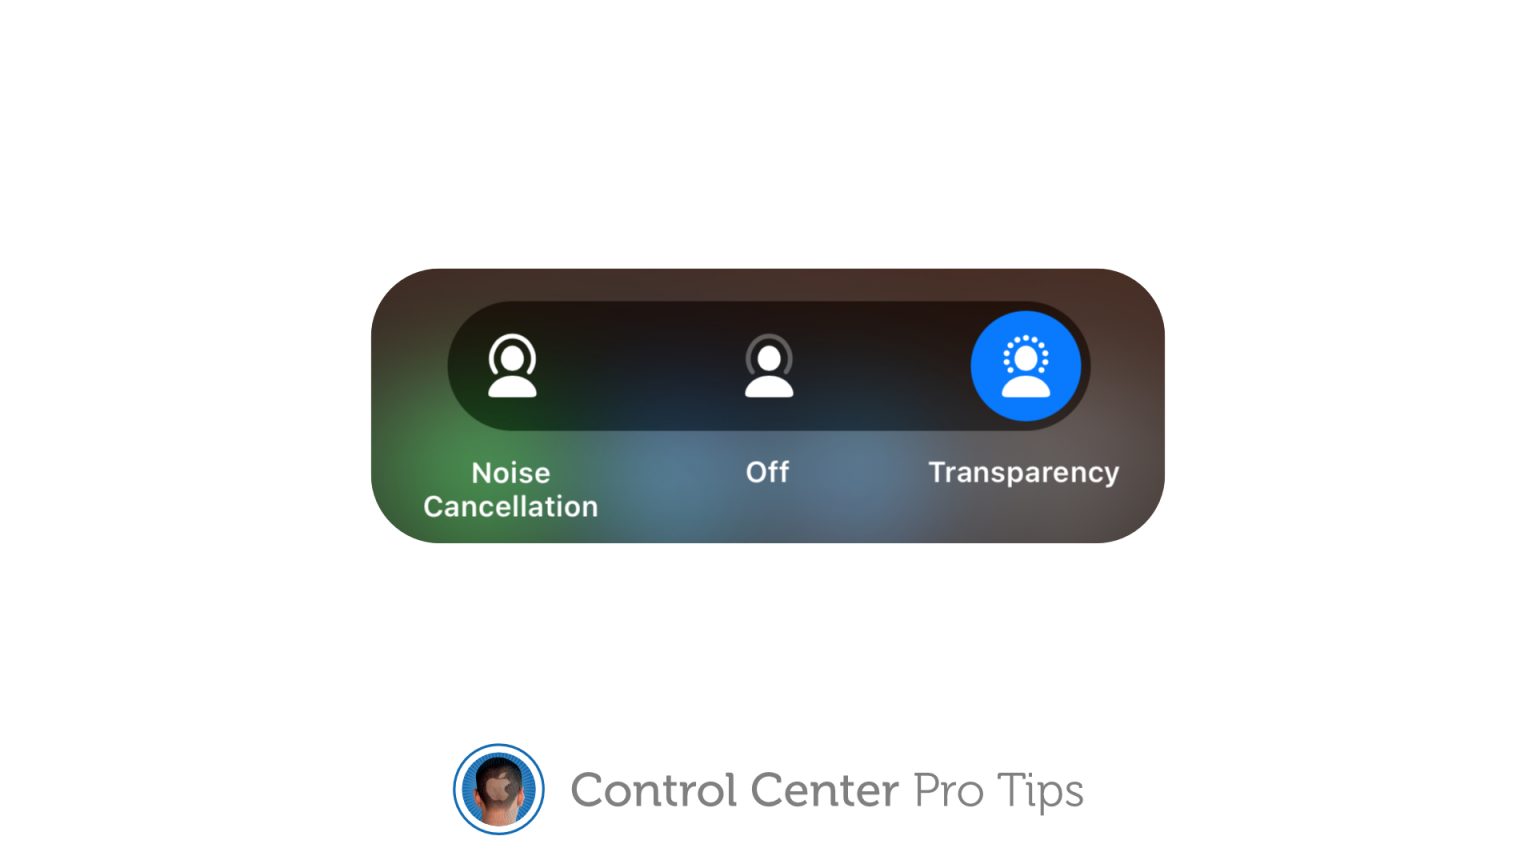 Switch AirPods audio modes in Control Center